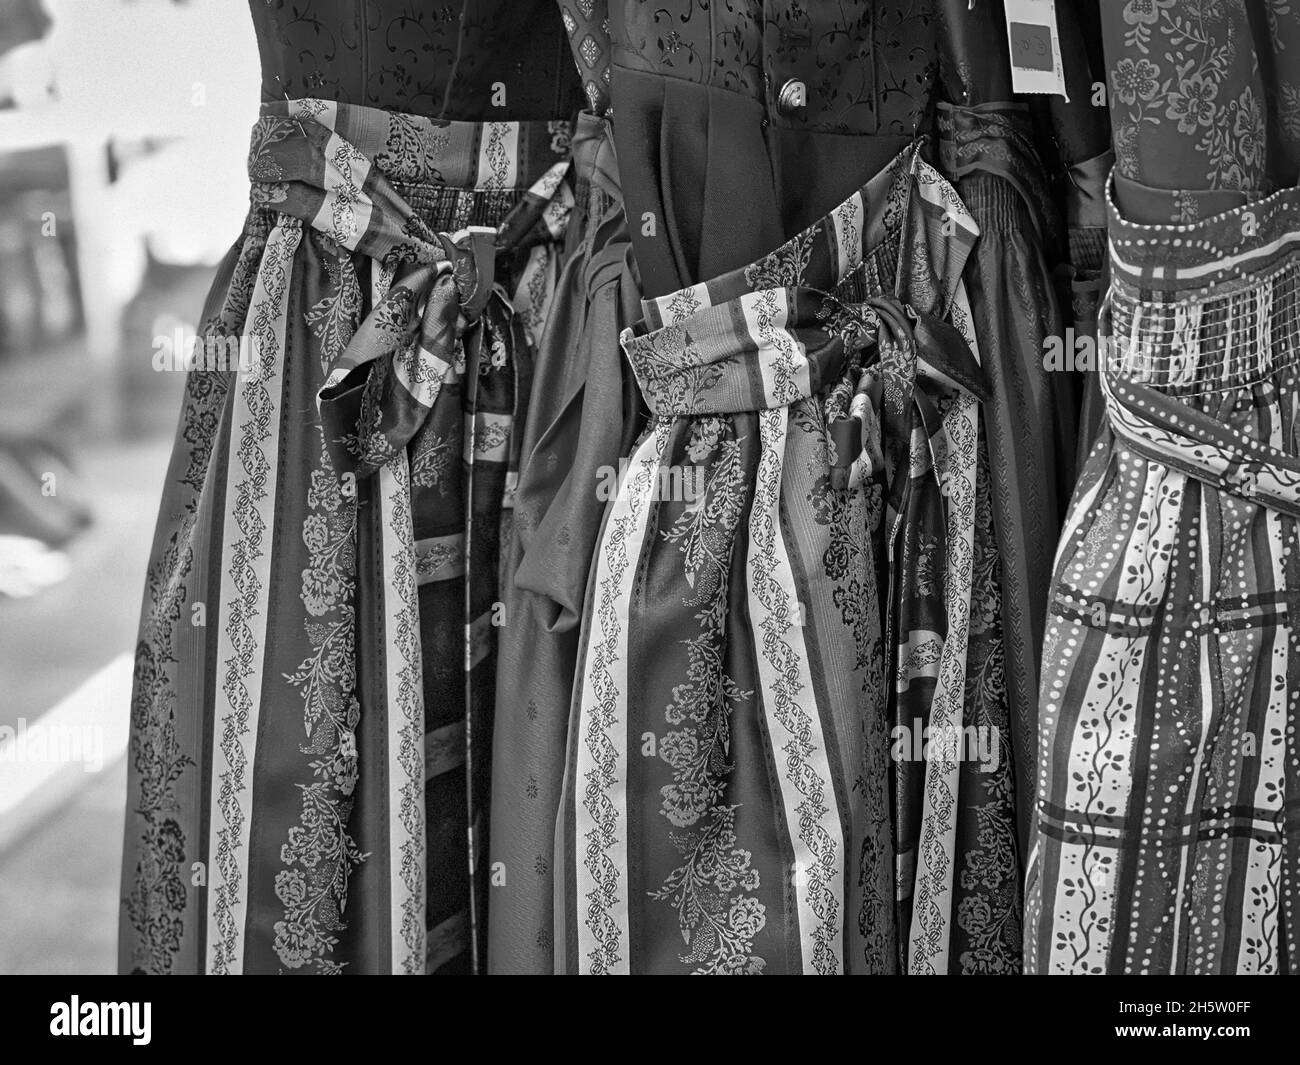 Grayscale shot of dresses with decors for women on display Stock Photo